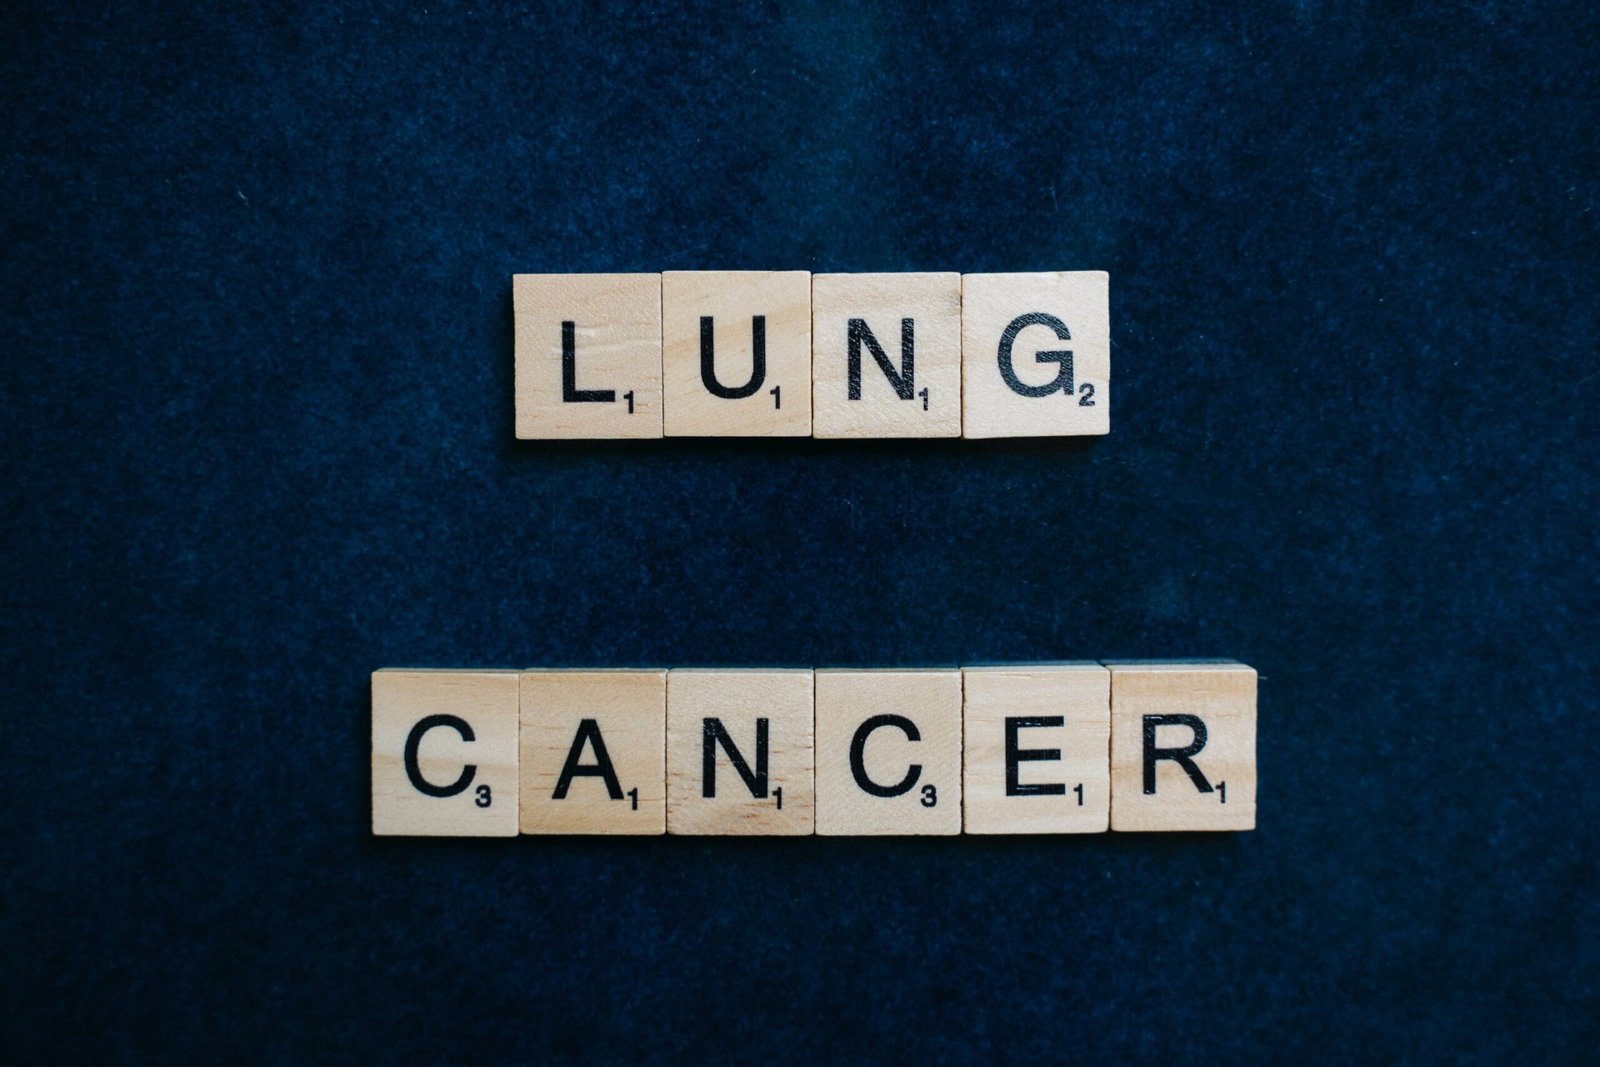 Lung cancer screening found to prolong lives in real world study